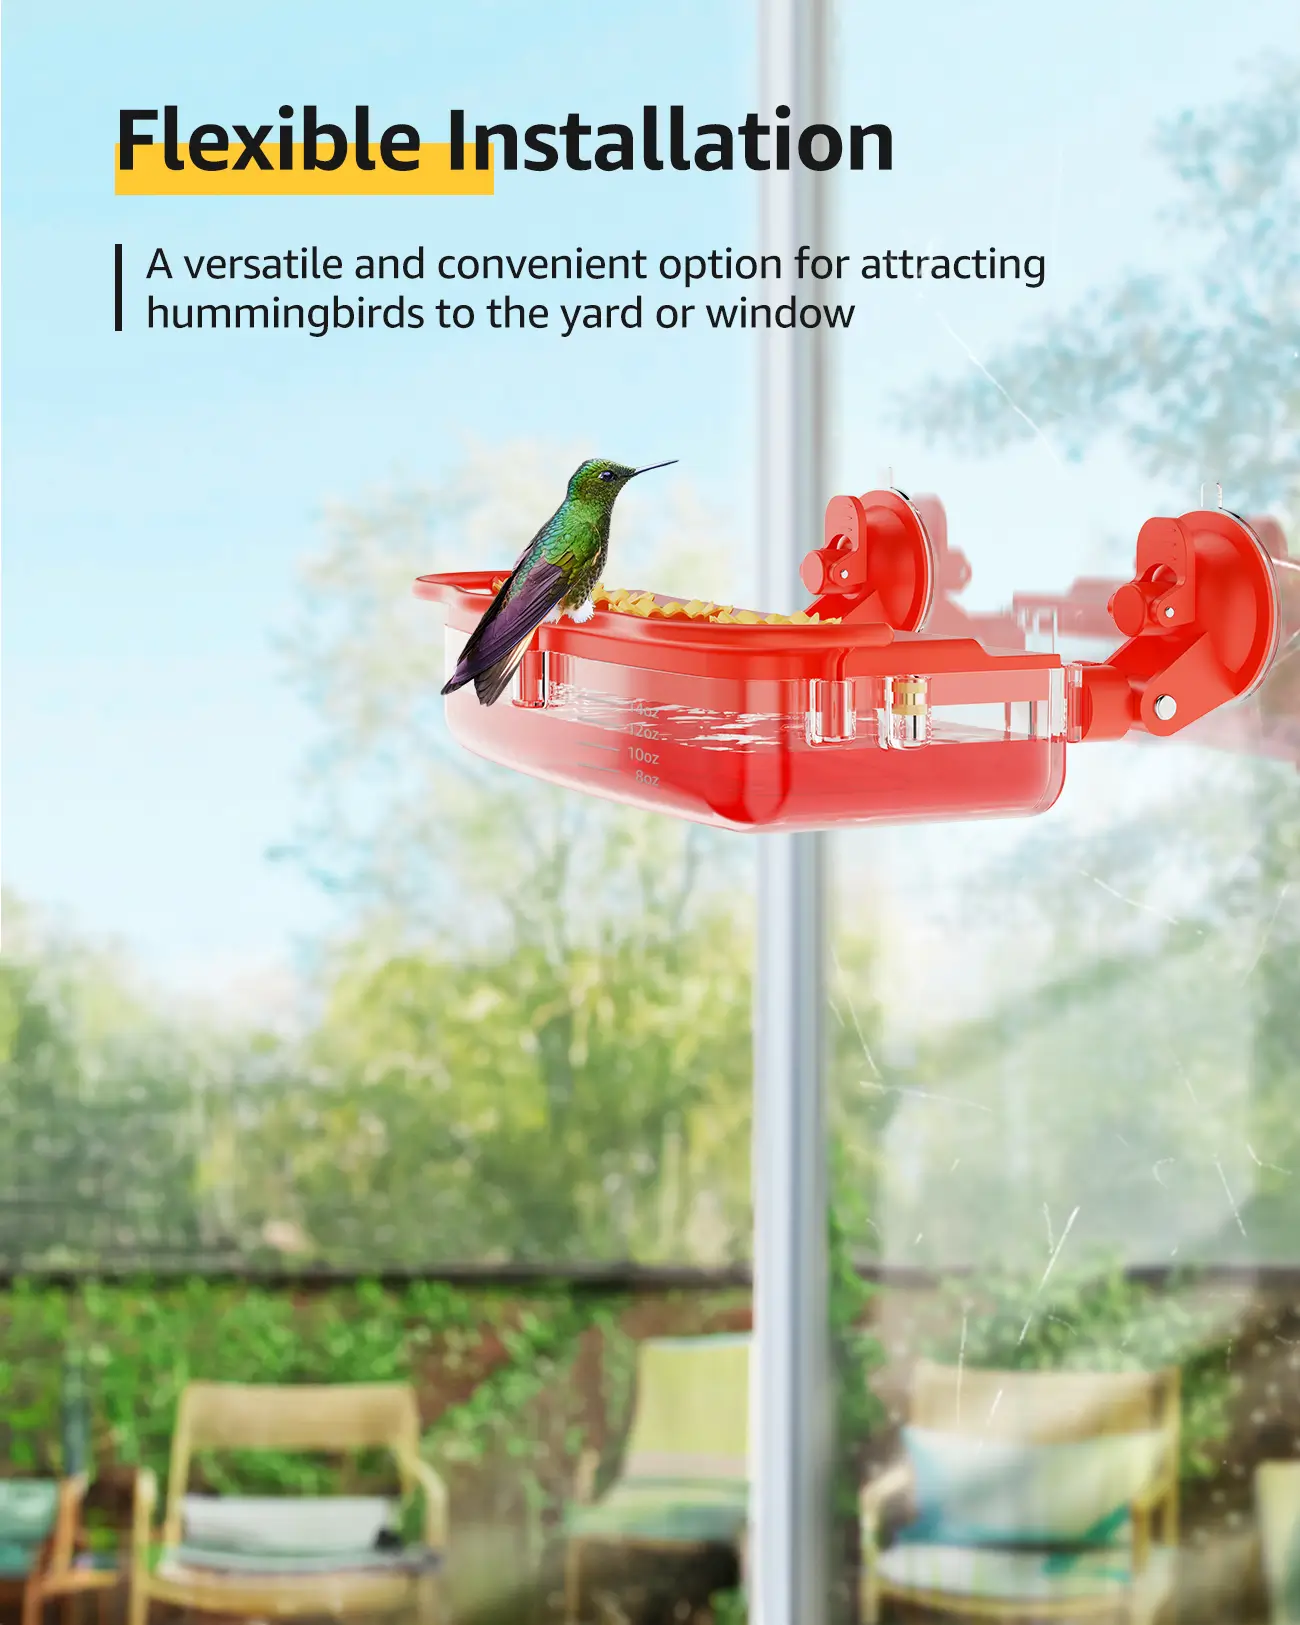 Flexible Installation. A versatile and convenient option for attracting hummingbirds to the yard or window.